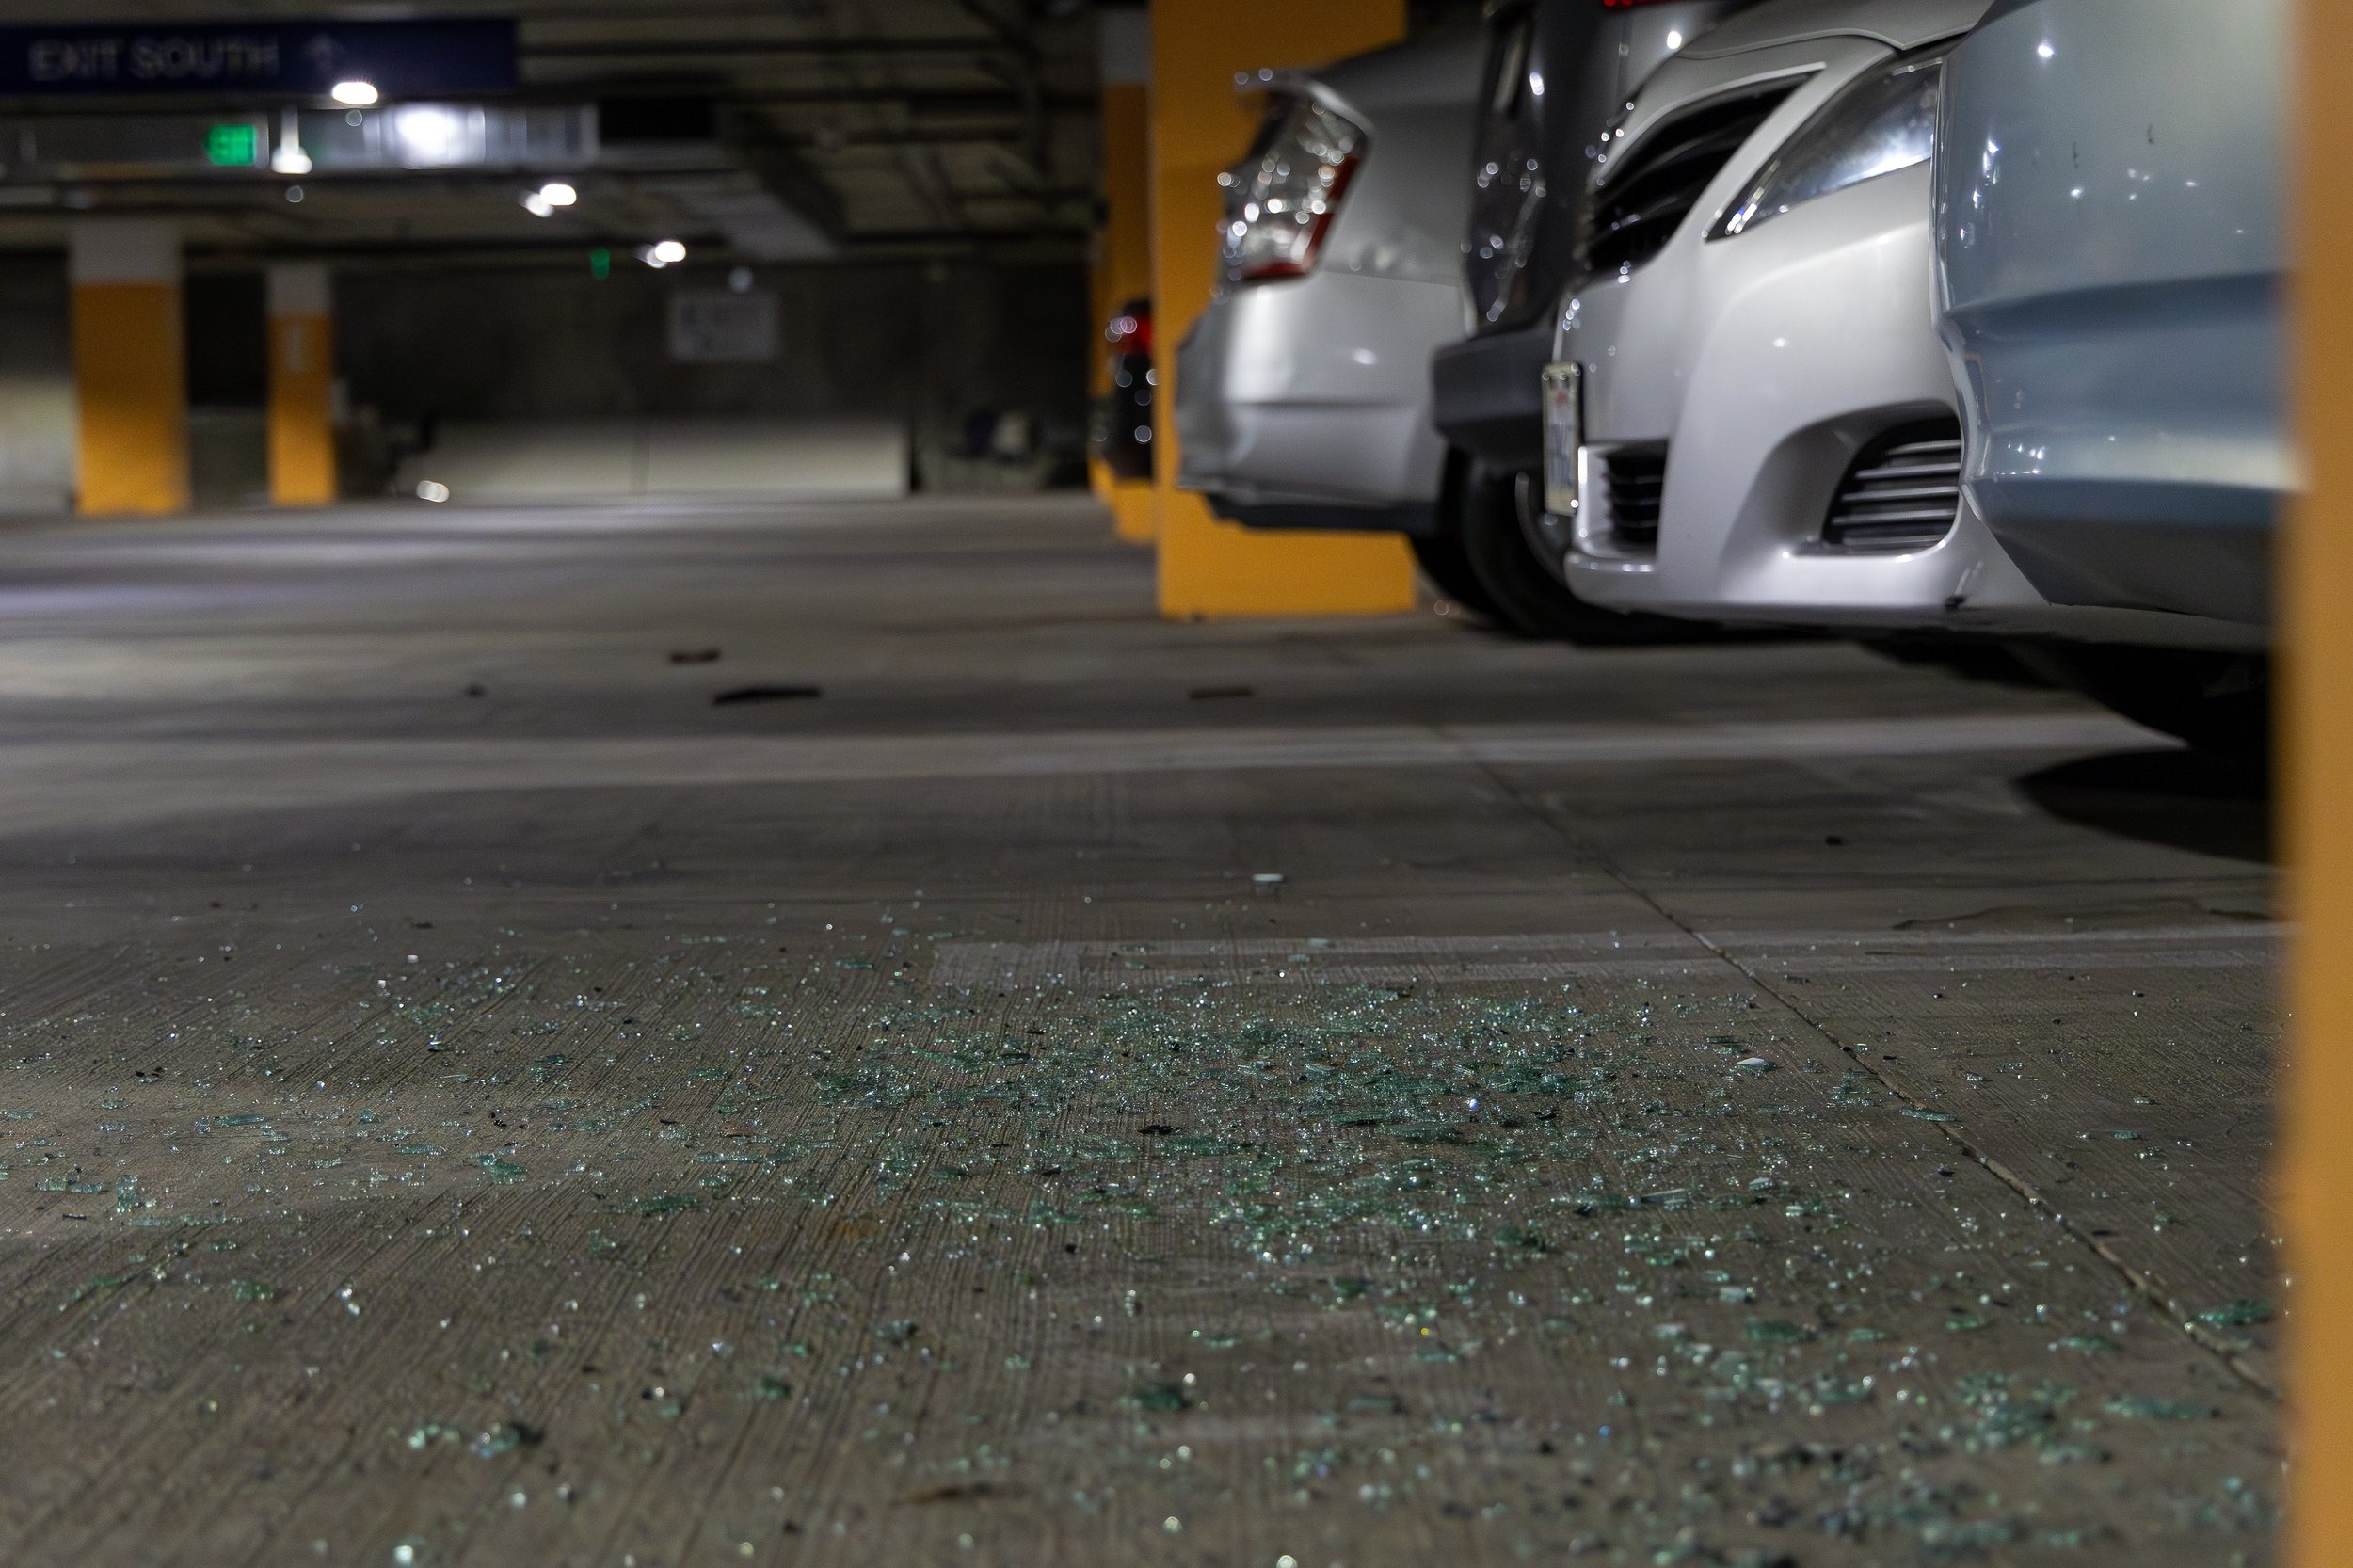  Shattered glass on the floor of the Level P3 of the underground parking of Santa Monica College (SMC) Student Services building, Santa Monica, Calif., on Feb. 28, 2024. According to Mr. Olivera Santos (Grounds services of SMC), between 20-25 cars we